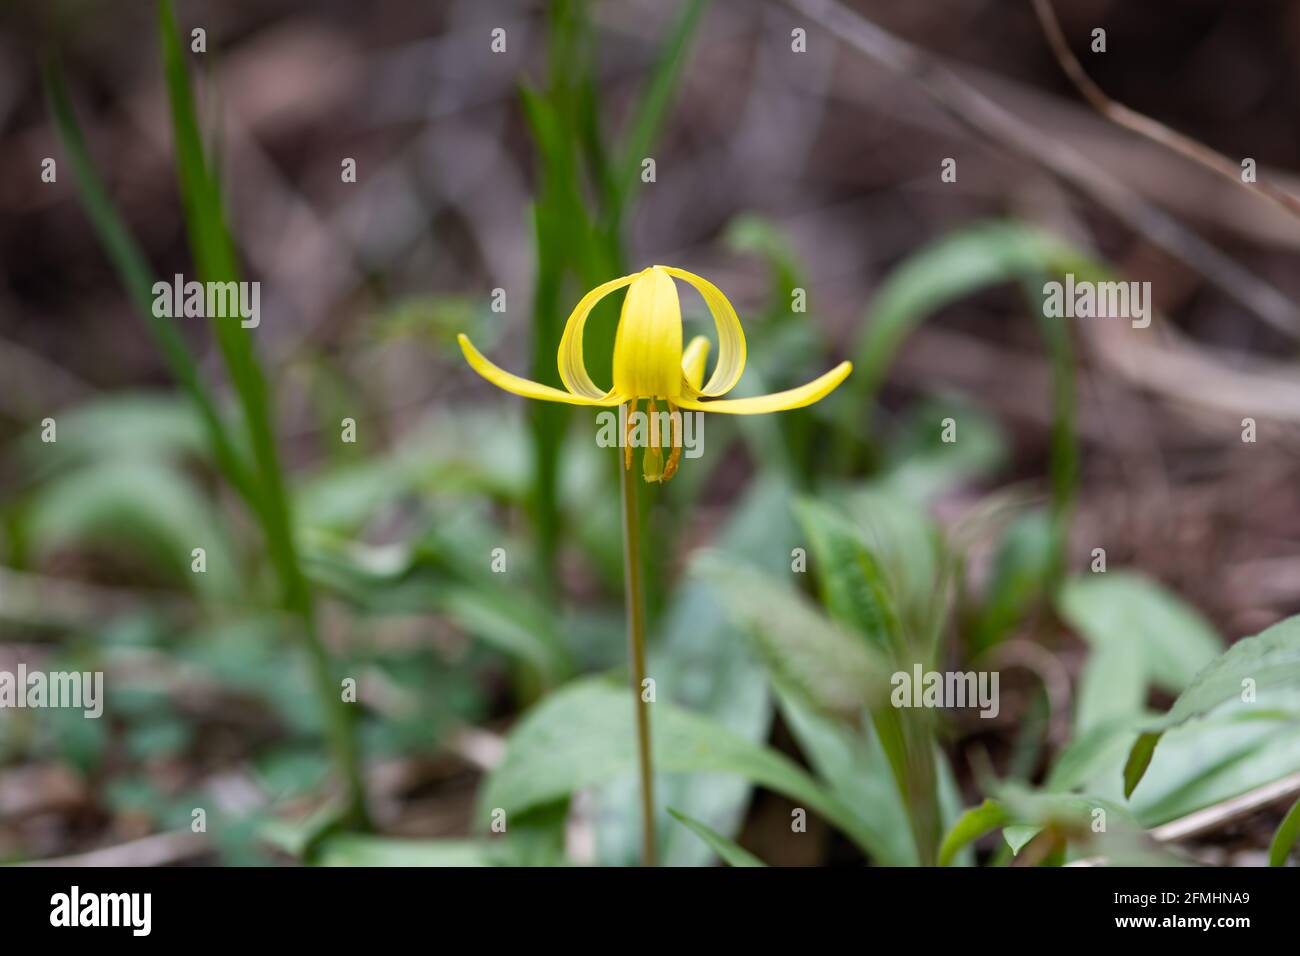 A yellow trout lily flower, Erythronium americanum, growing in the Adirondack Mountains, NY wilderness in early spring. Stock Photo